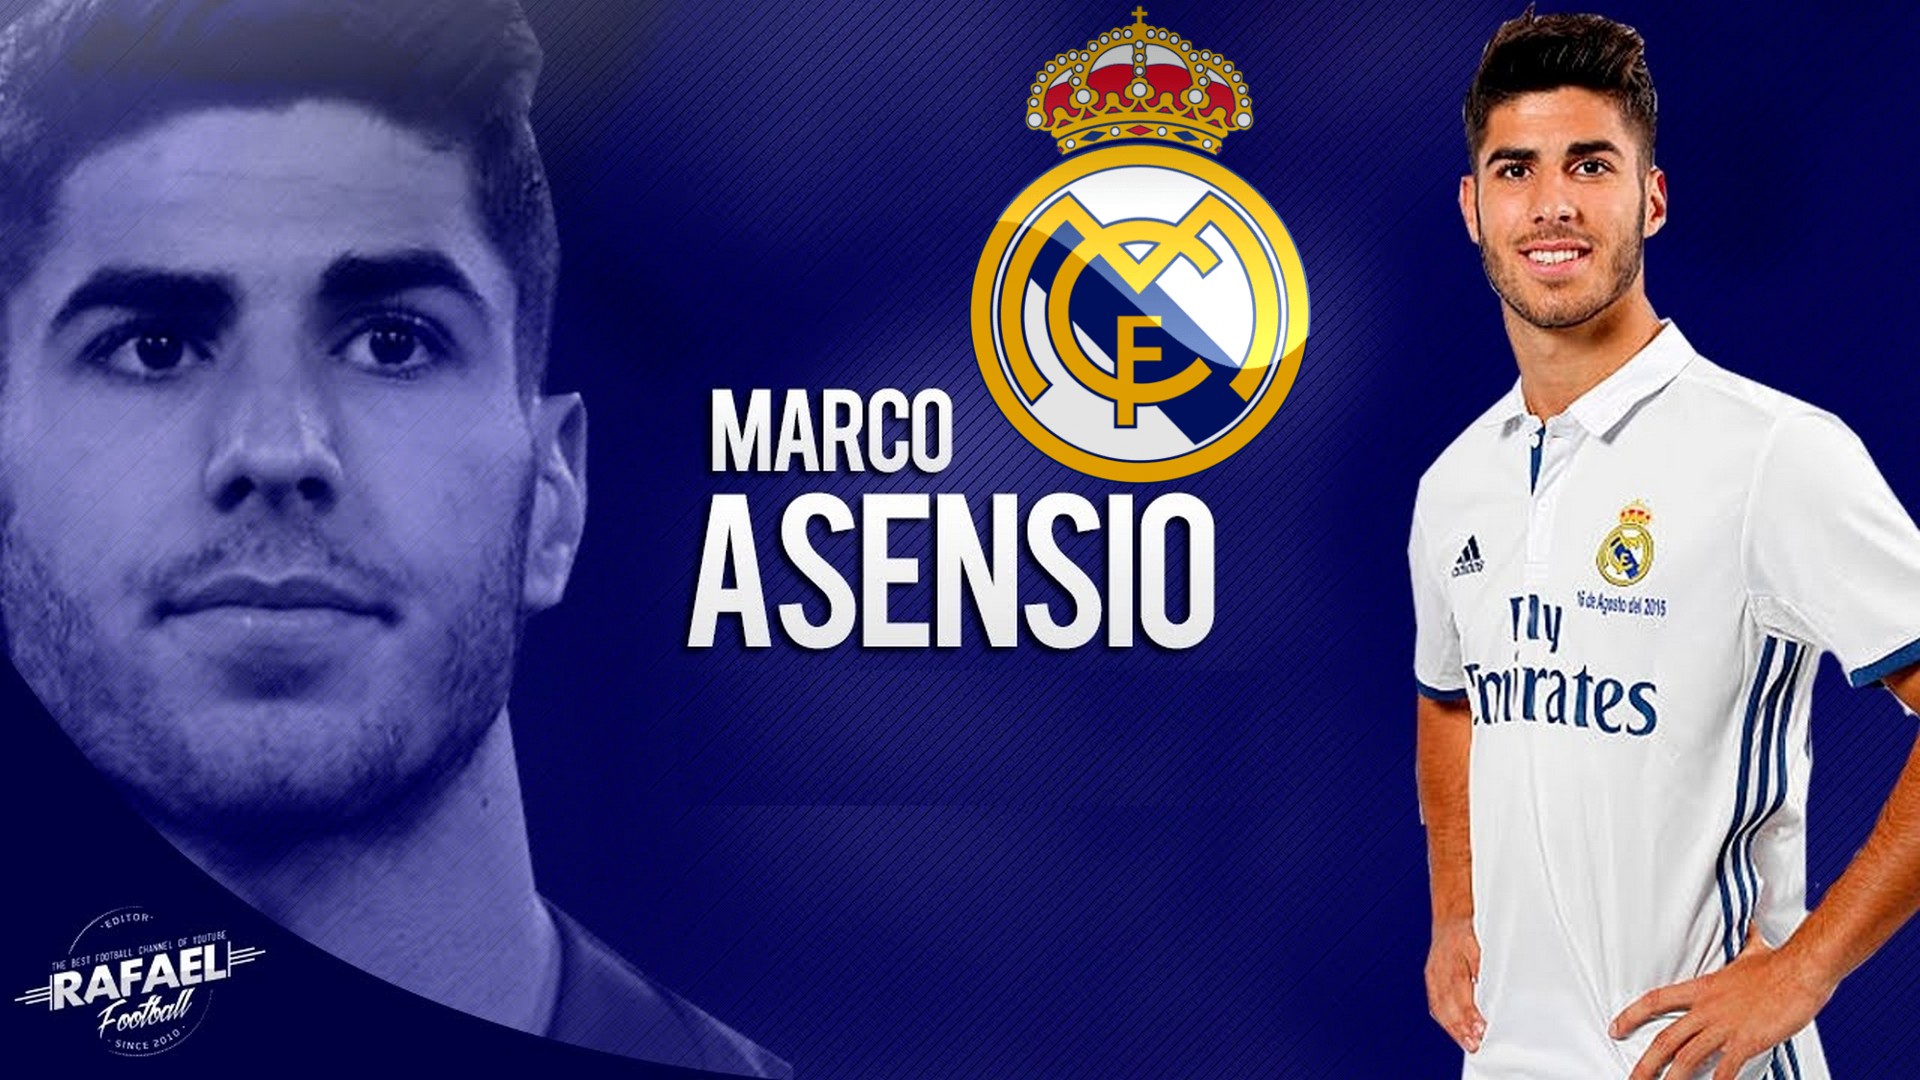 Wallpaper Desktop Marco Asensio Real Madrid HD With Resolution 1920X1080 pixel. You can make this wallpaper for your Mac or Windows Desktop Background, iPhone, Android or Tablet and another Smartphone device for free